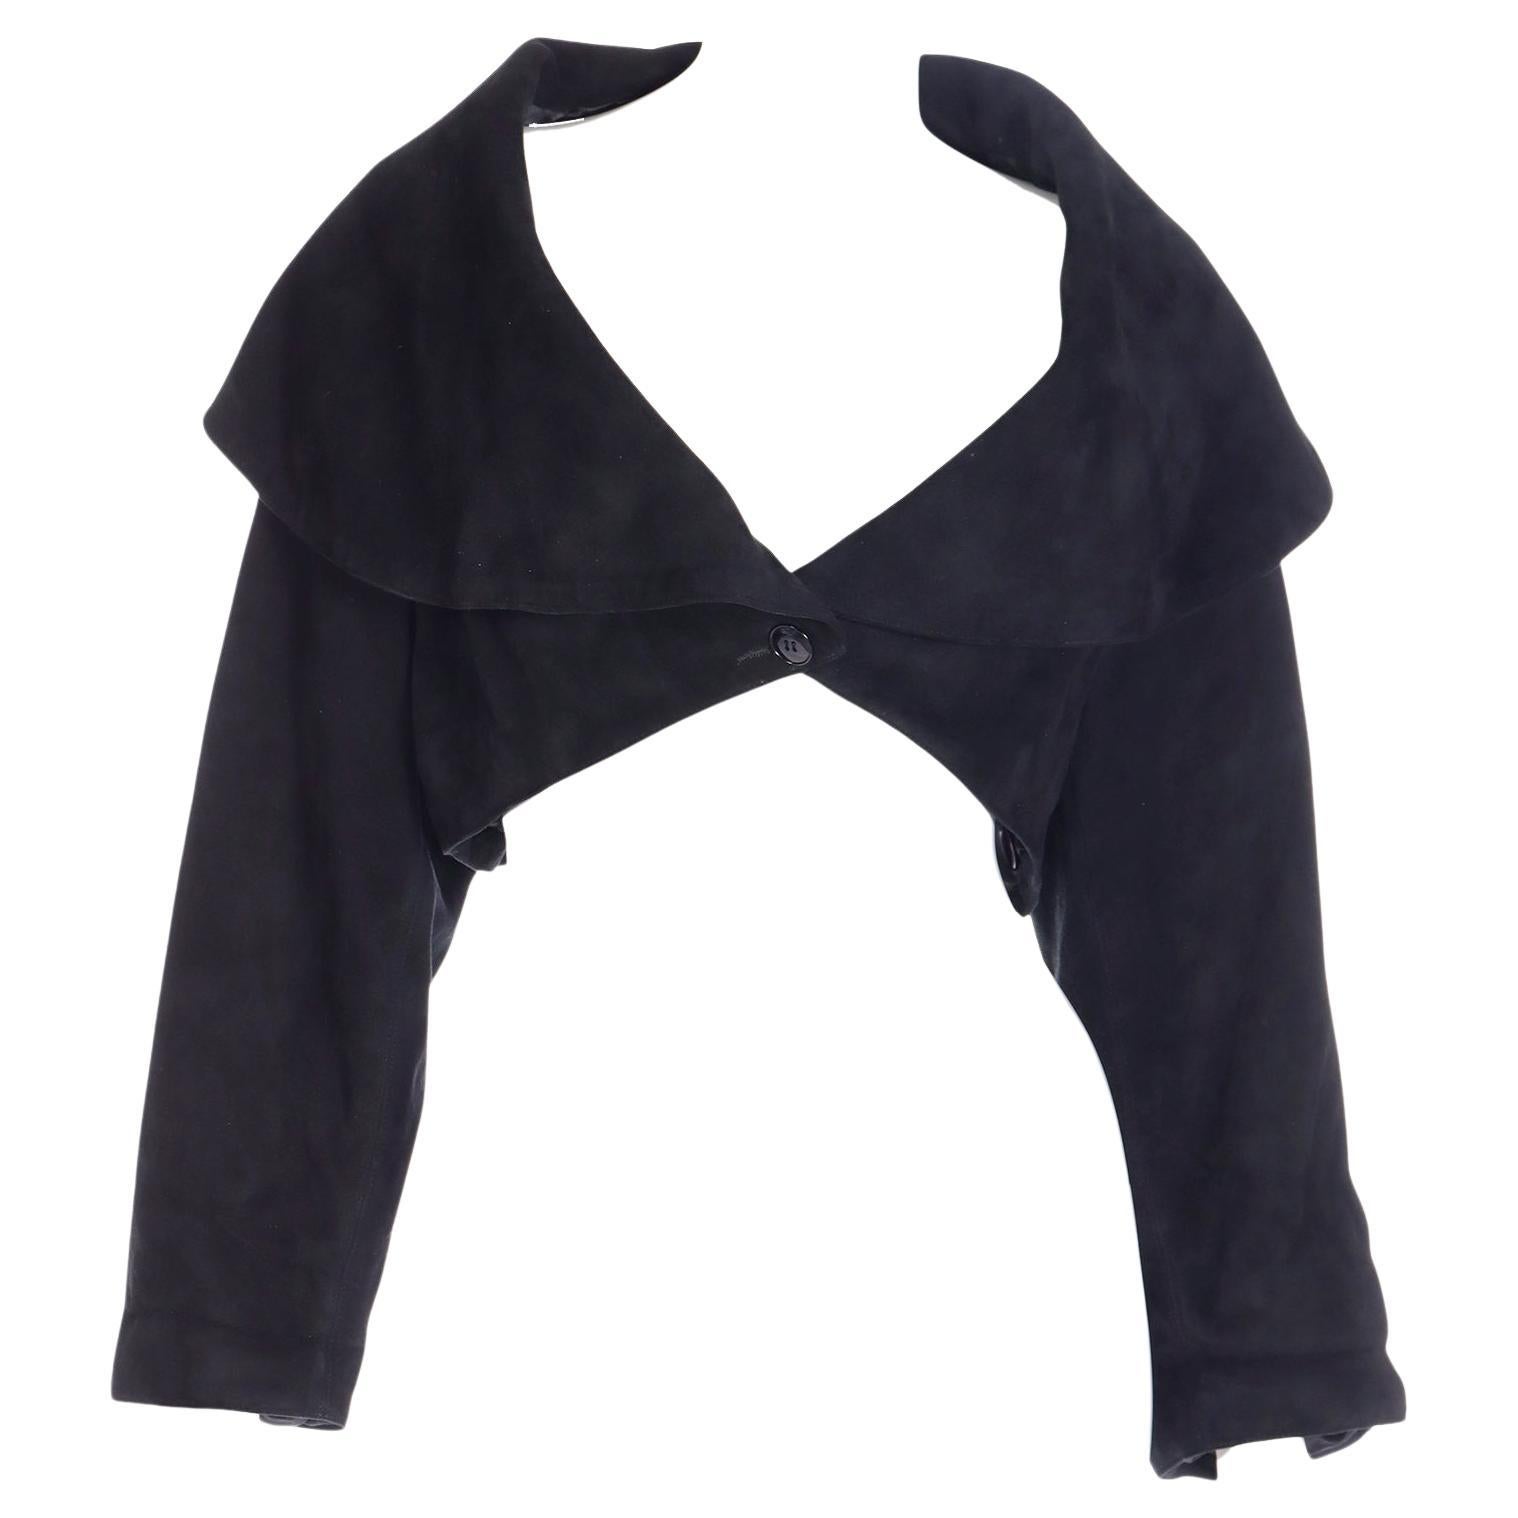 Azzedine Alaia Fall 1989 Vintage Black Lamb Suede Cropped Runway Jacket For Sale